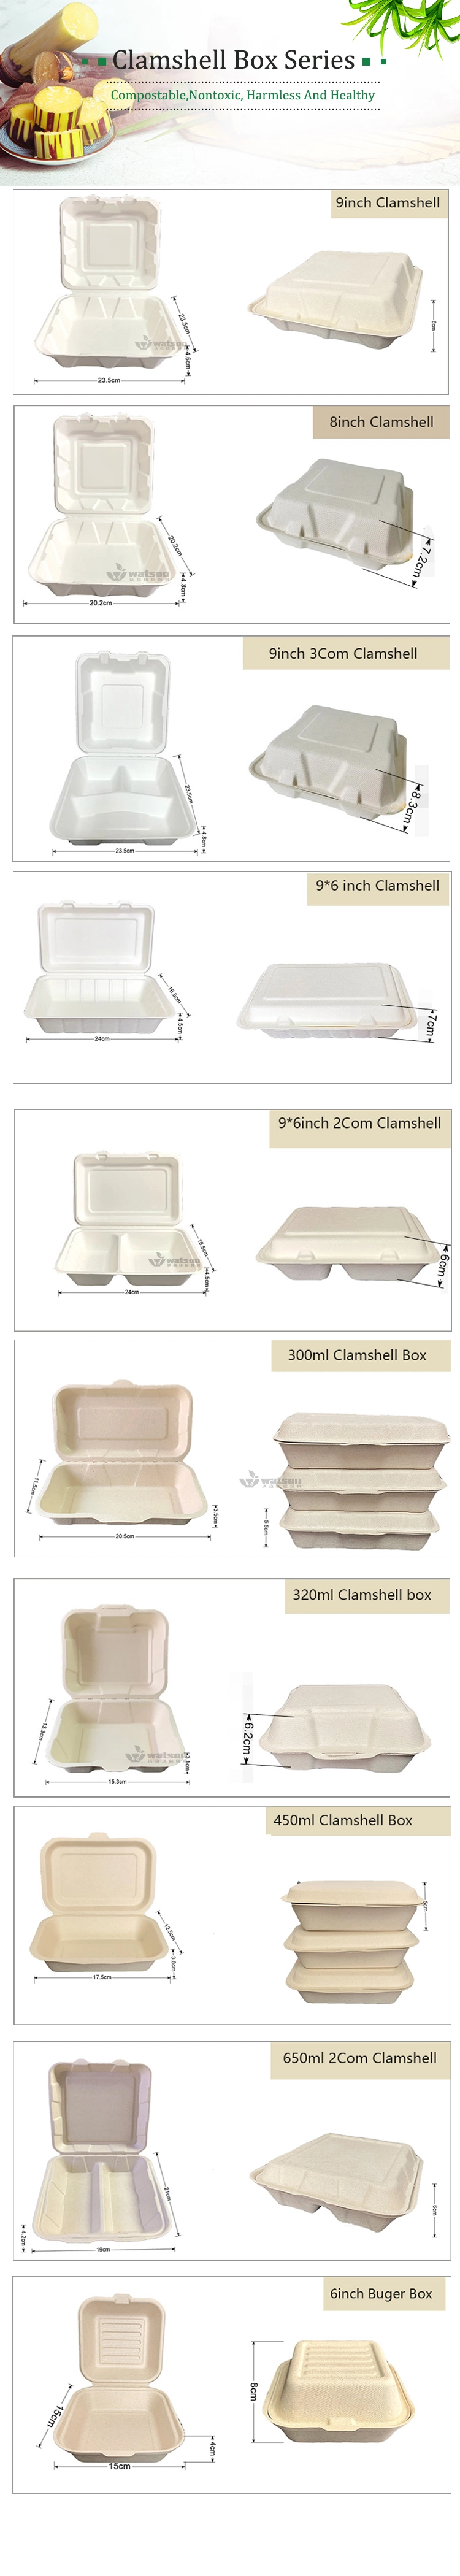 Bamboo Fiber Restaurant Heatable Sustainable Chemical Free Biodegradble Disposable Eco Friendly Lunch Sushi Pasta Noodle Boxes